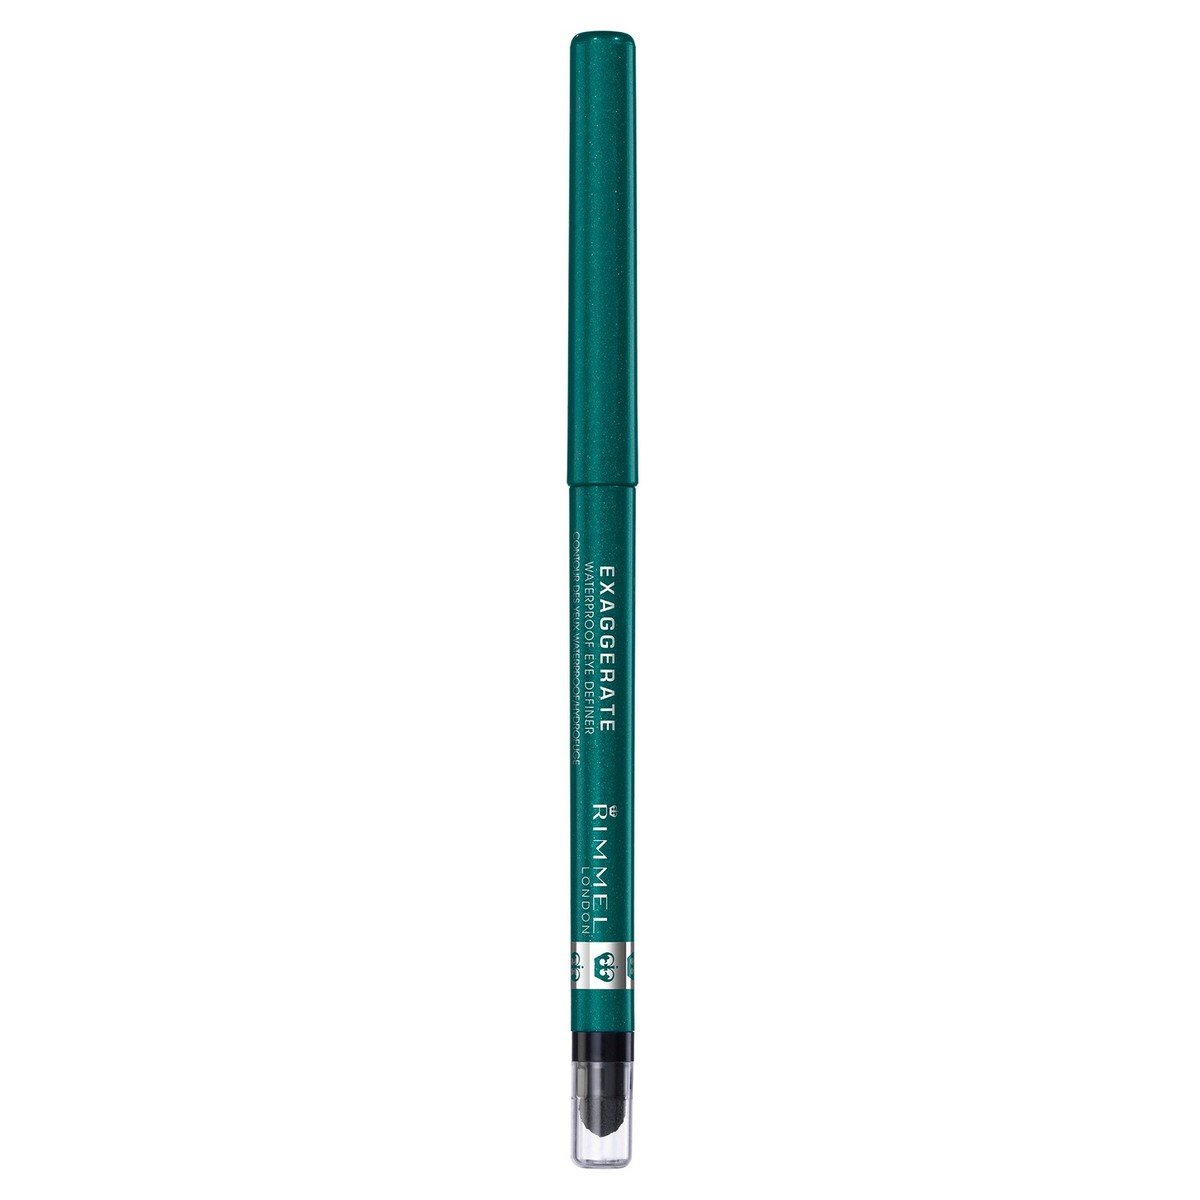 Rimmel London Exaggerate Waterproof Eye Definer 250 Emerald Sparkle A Teal Green Shade 1pc